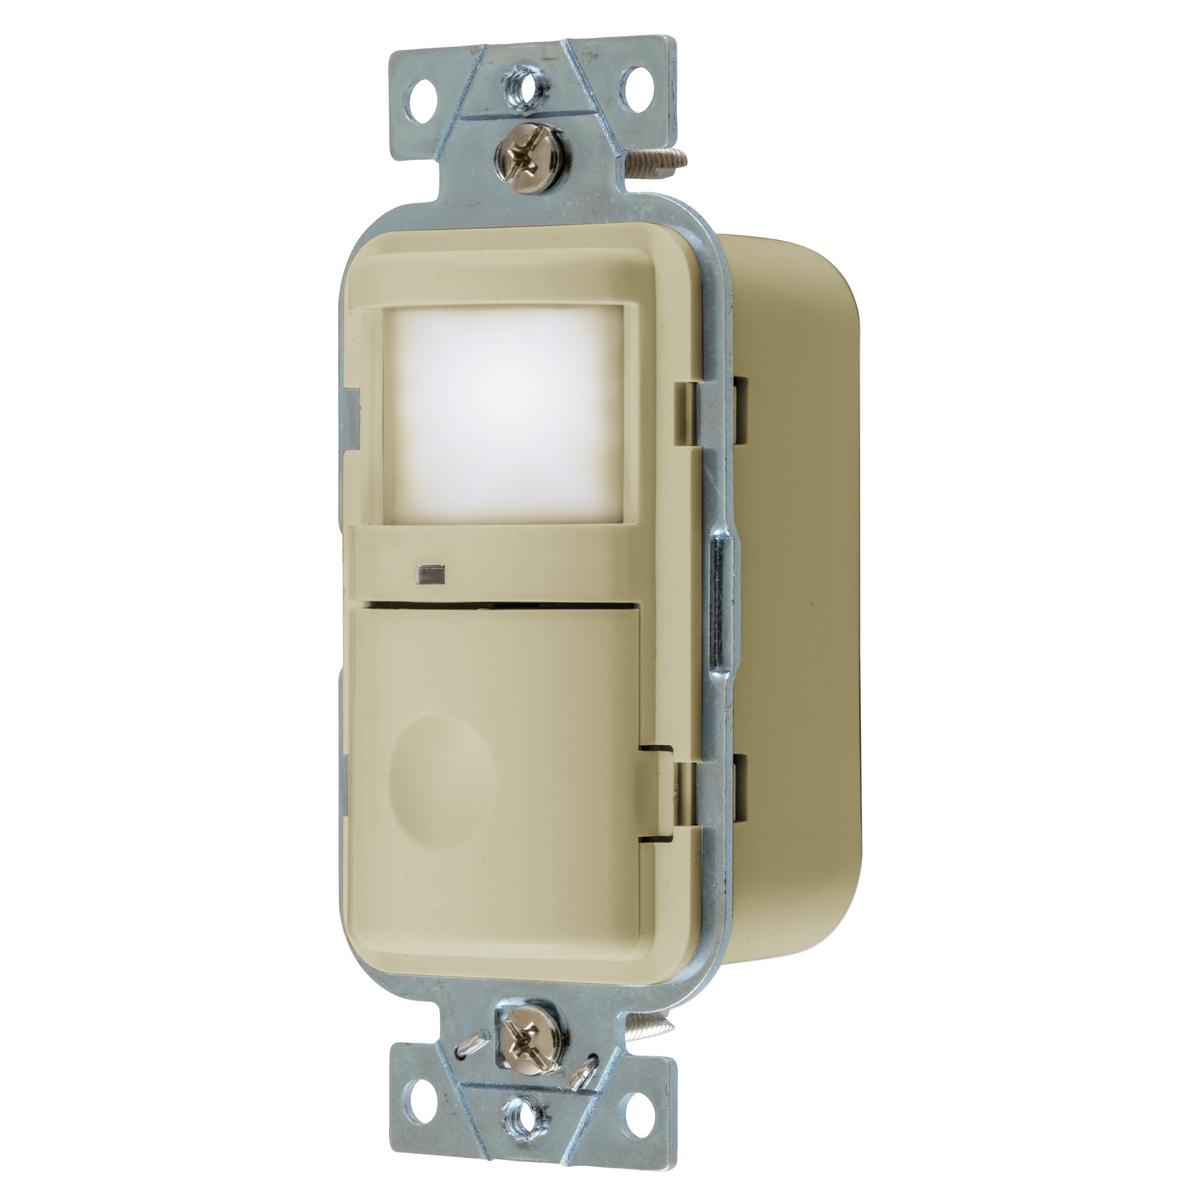 Hubbell WS2000NI Lighting Controls, Occupancy/Vacancy Sensors, Wall Switch, Passive Infrared Technology, 120/277V AC, With Night Light, Ivory  ; With Nightlight ; 